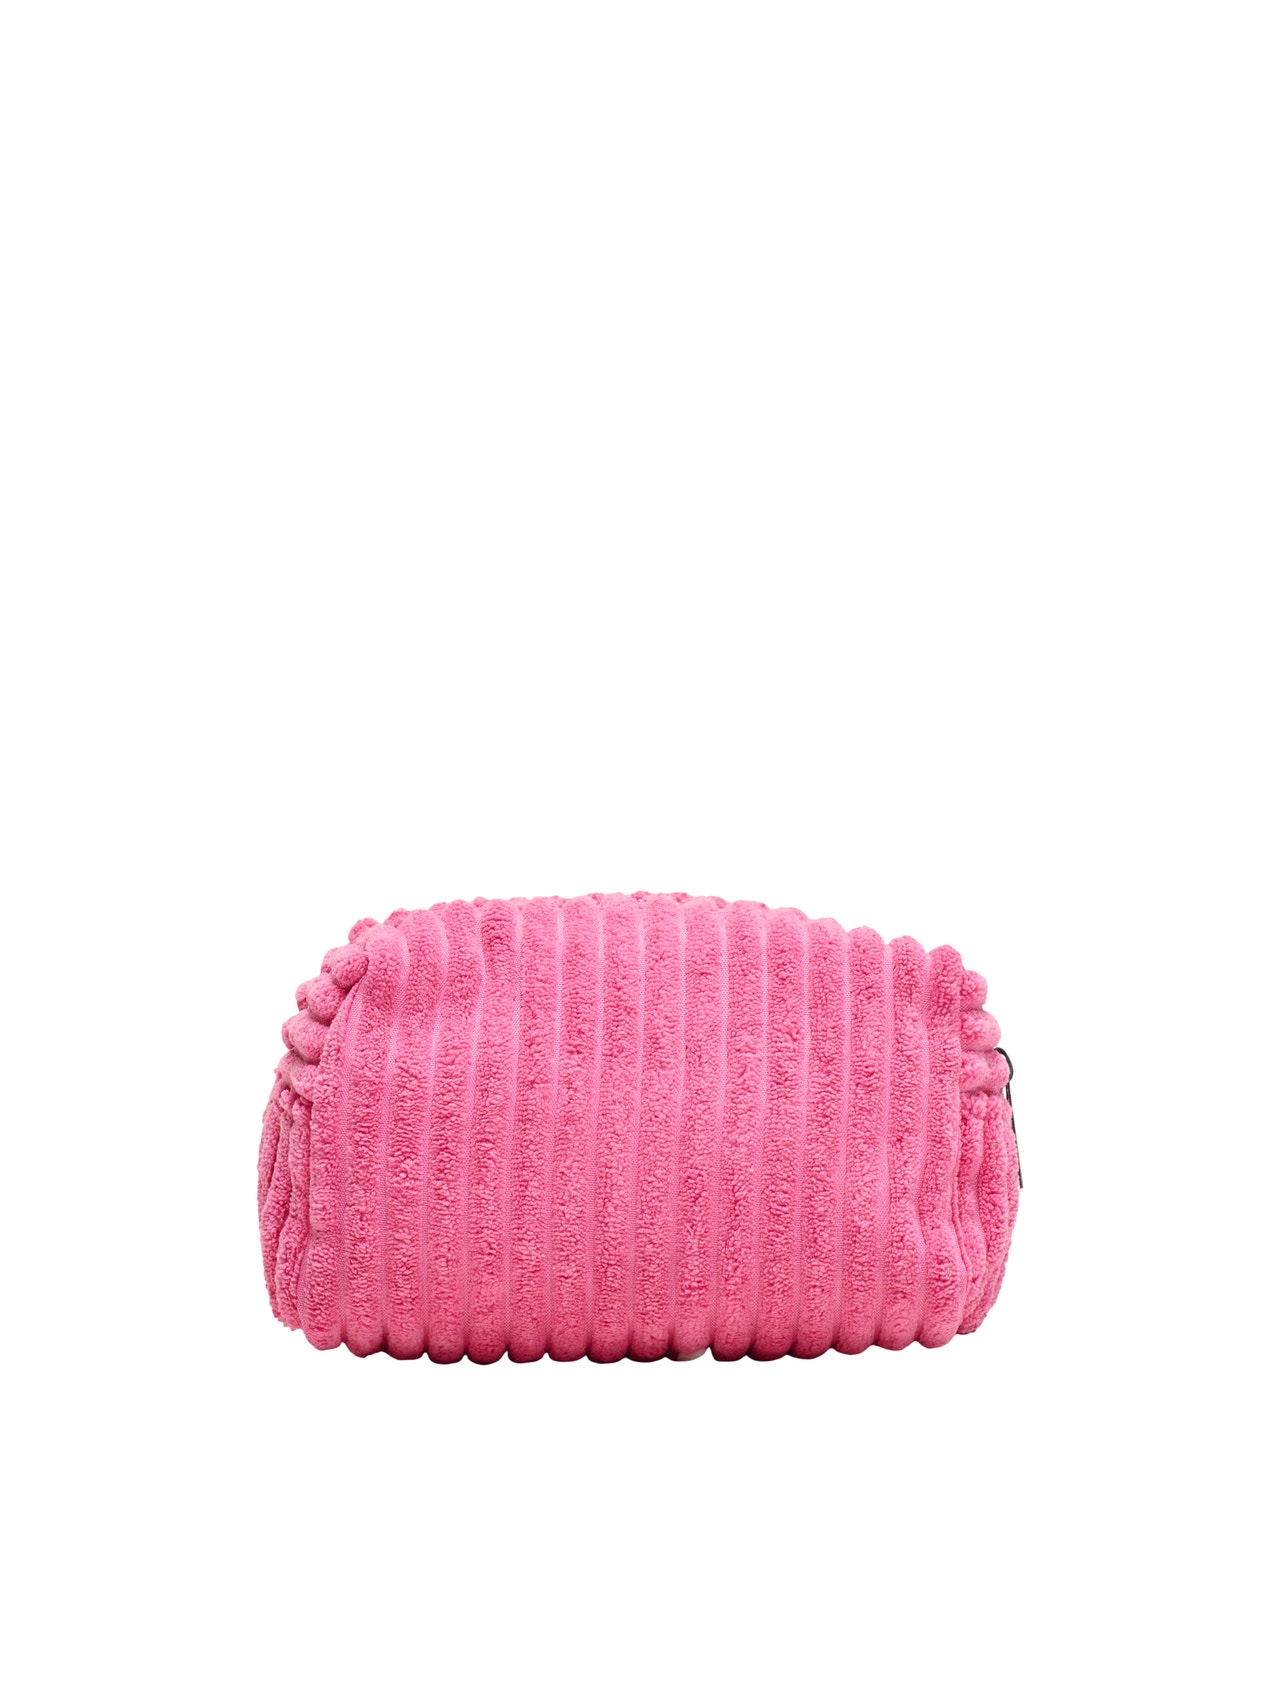 ONLY Small corduroy bag -Knockout Pink - 15313252